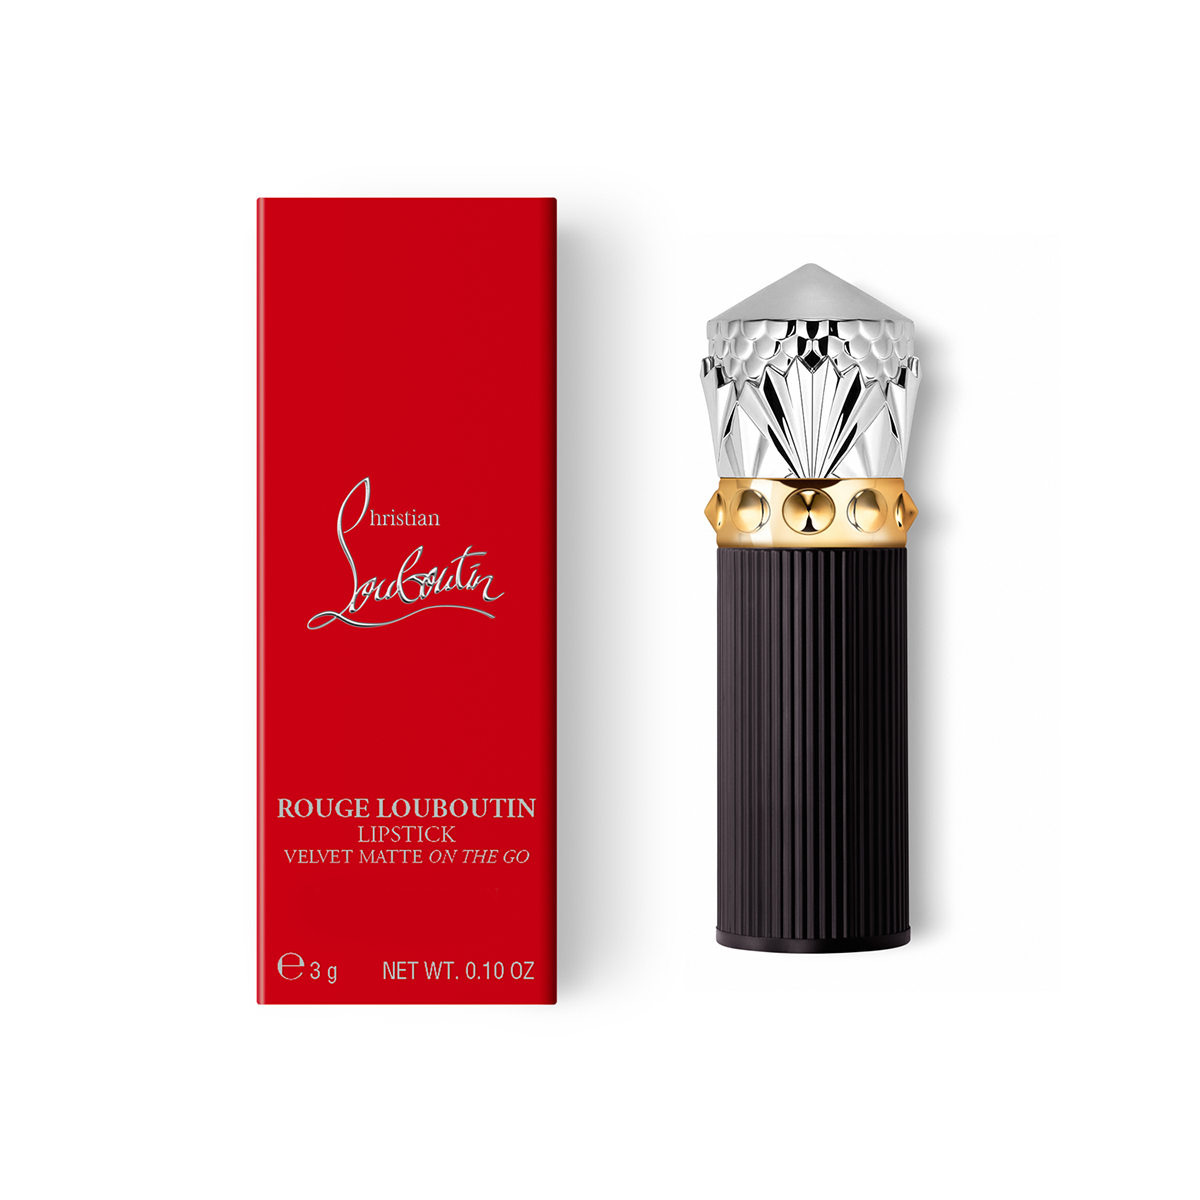 Christian Louboutin Beauty -- COMING SOON? - Page 157